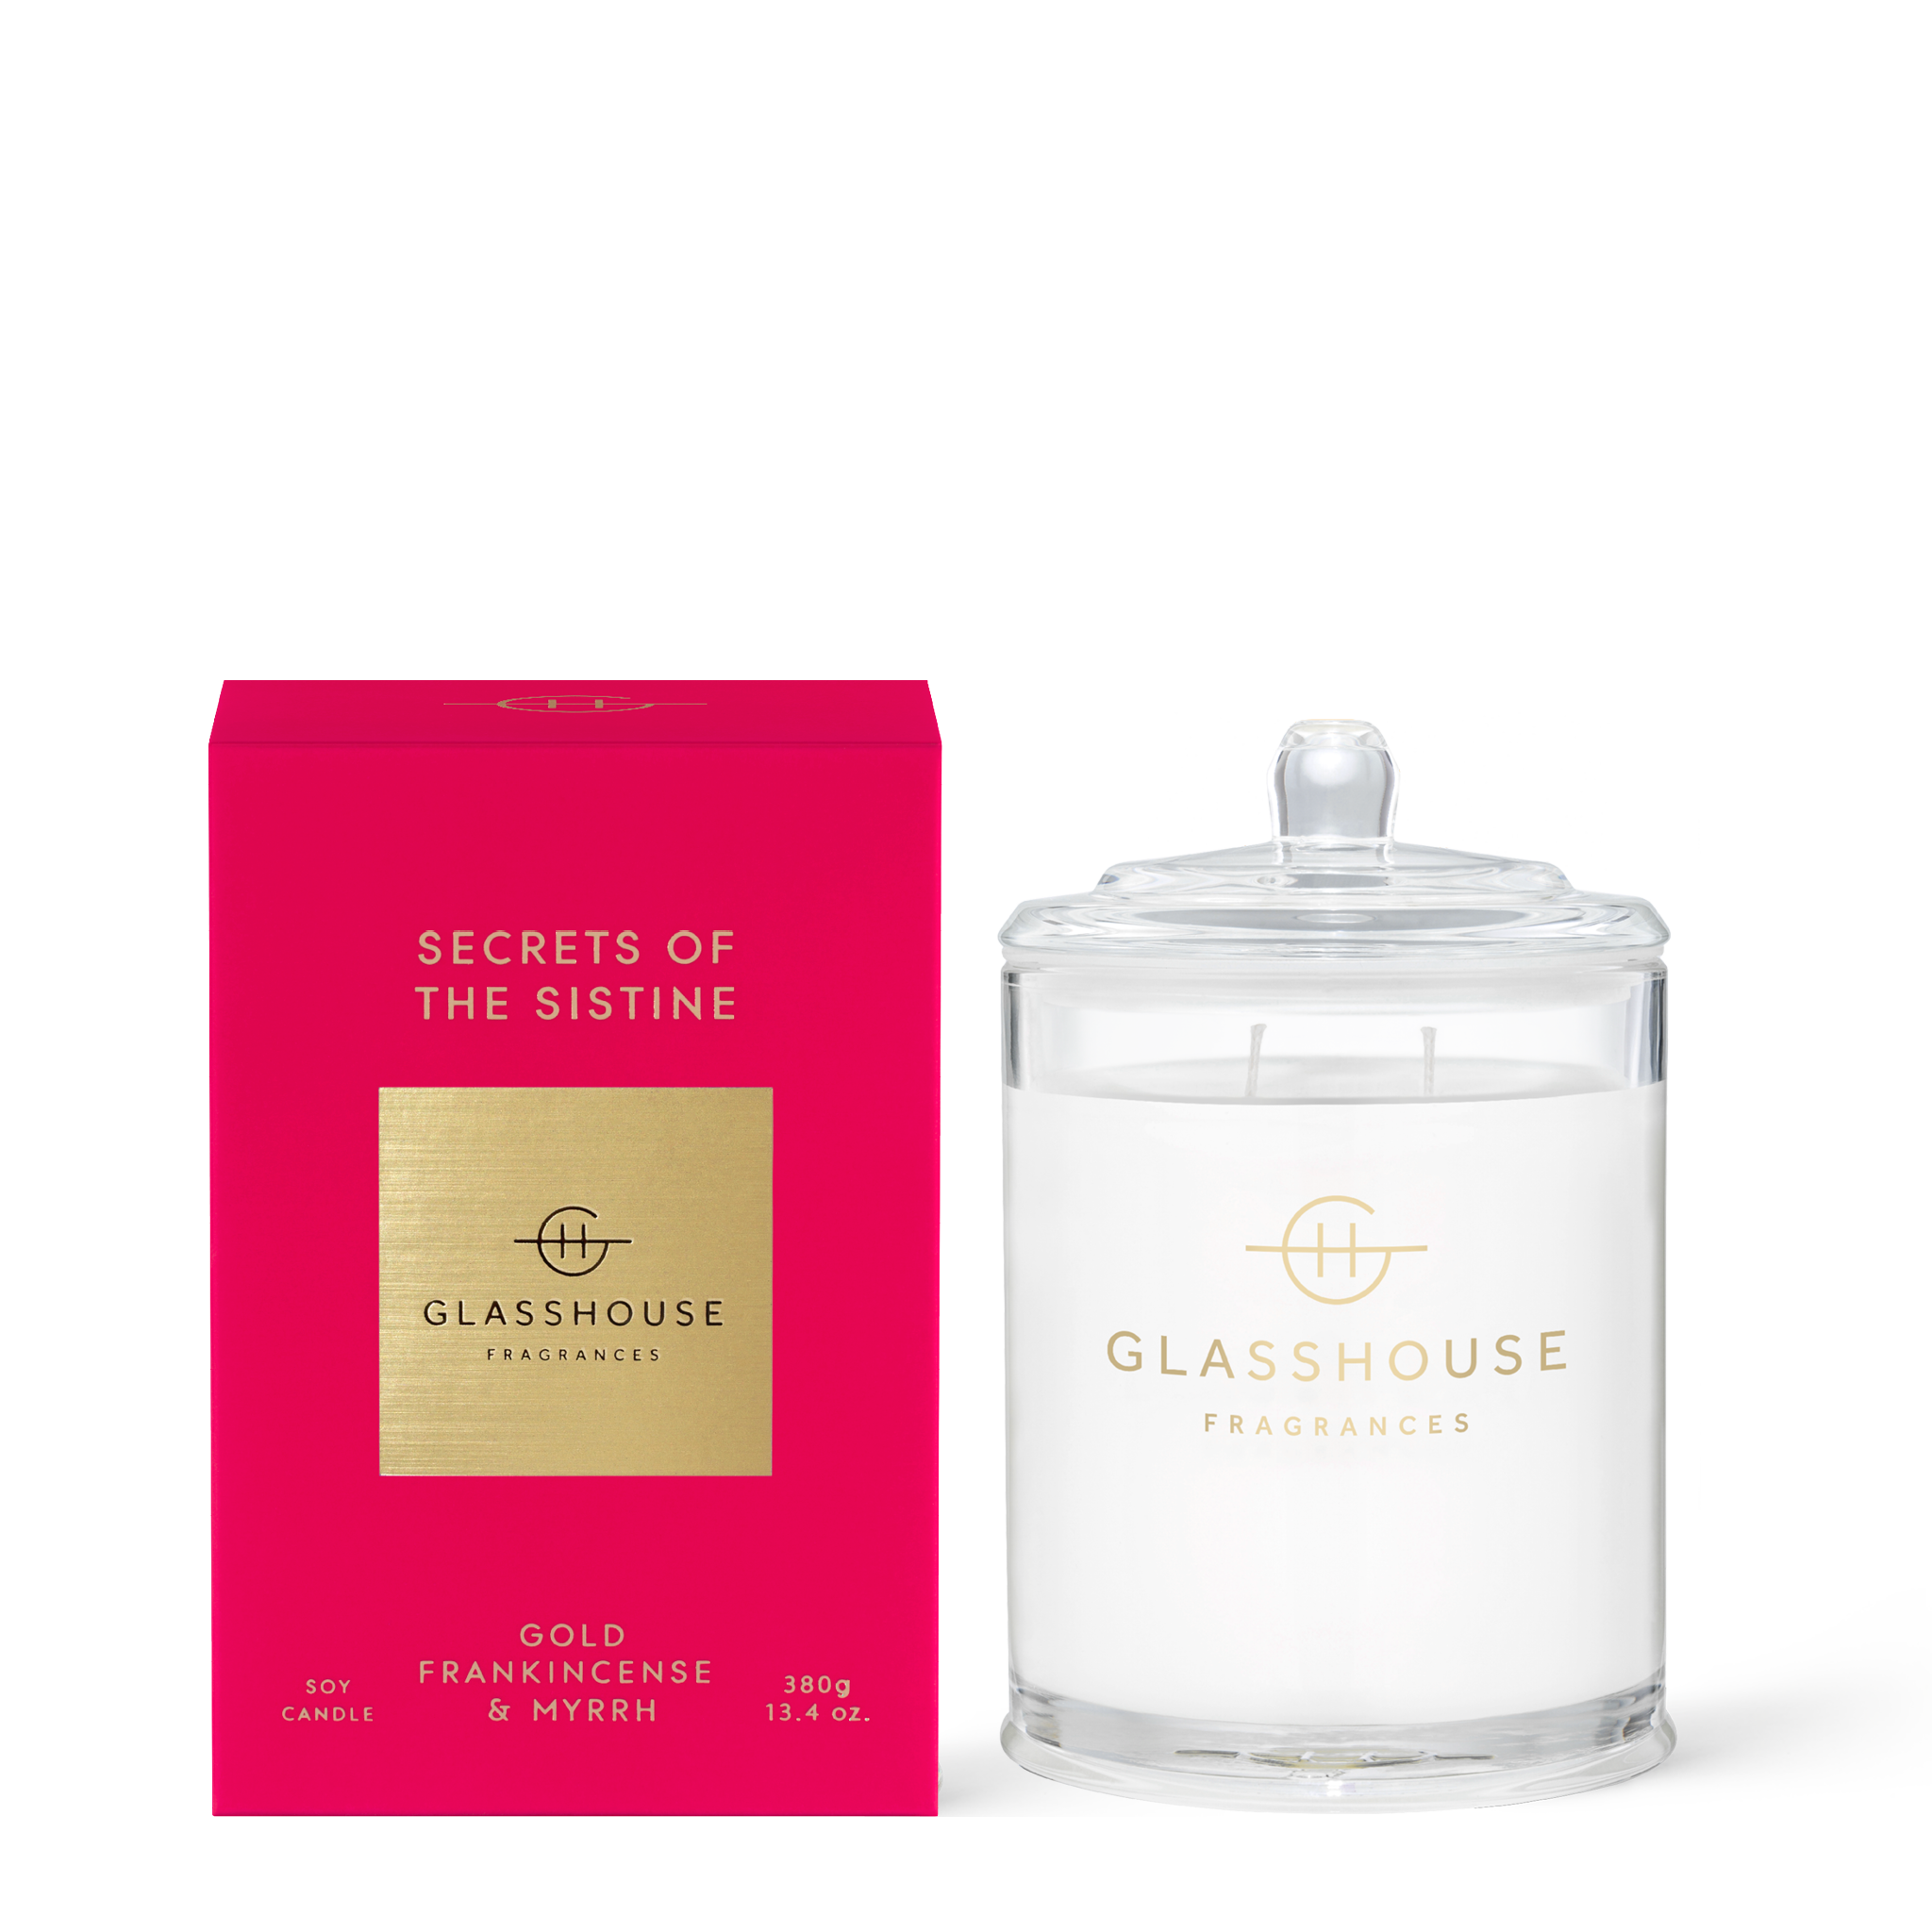 Glasshouse Fragrances Secrets of the Sistine Frankincense and Myrrh 380g Soy Candle with box